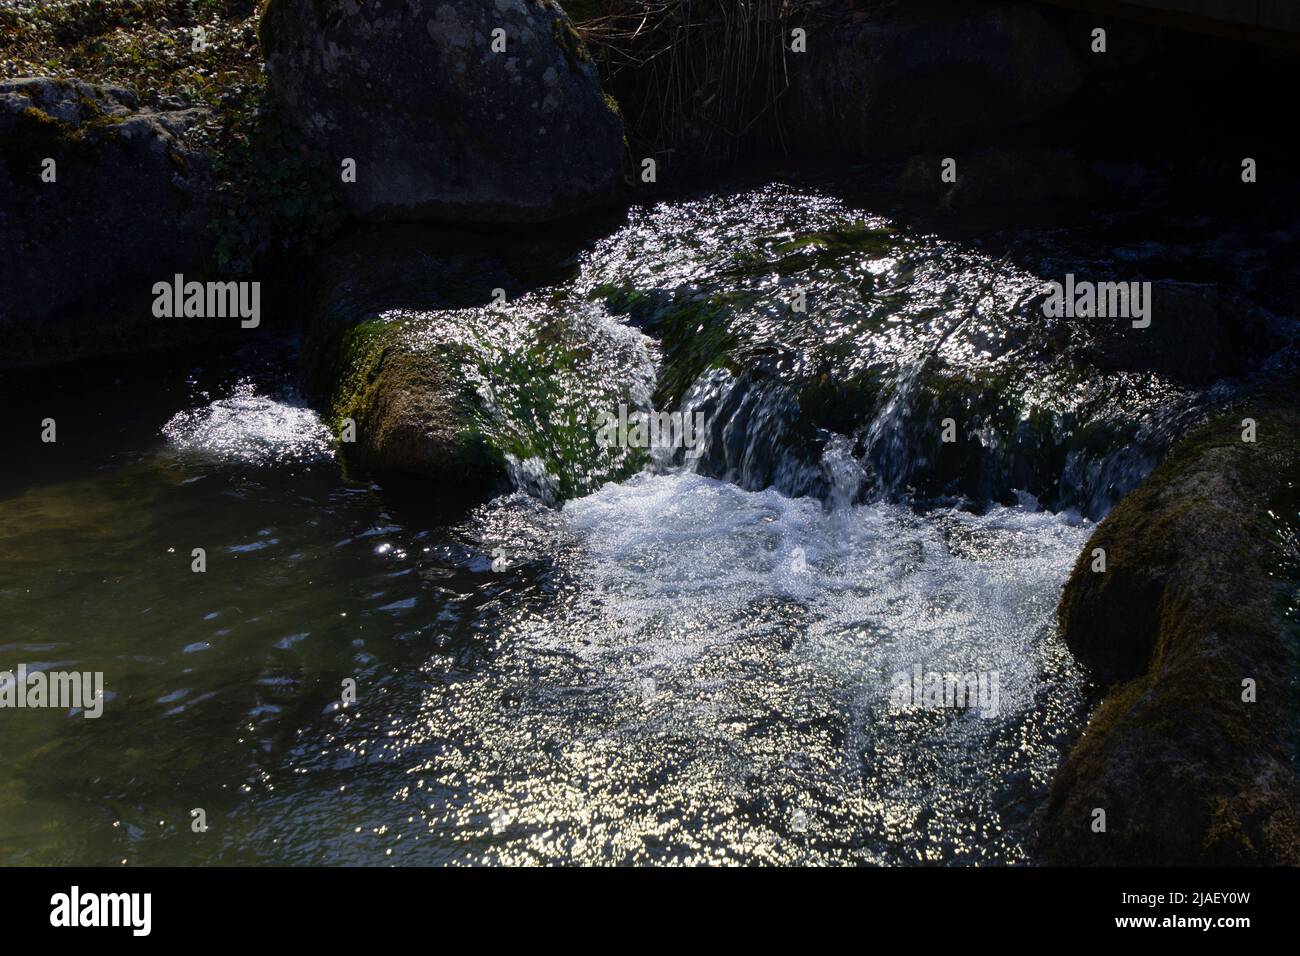 whitewater flow of stream water and spray from a stone detail scene Stock Photo